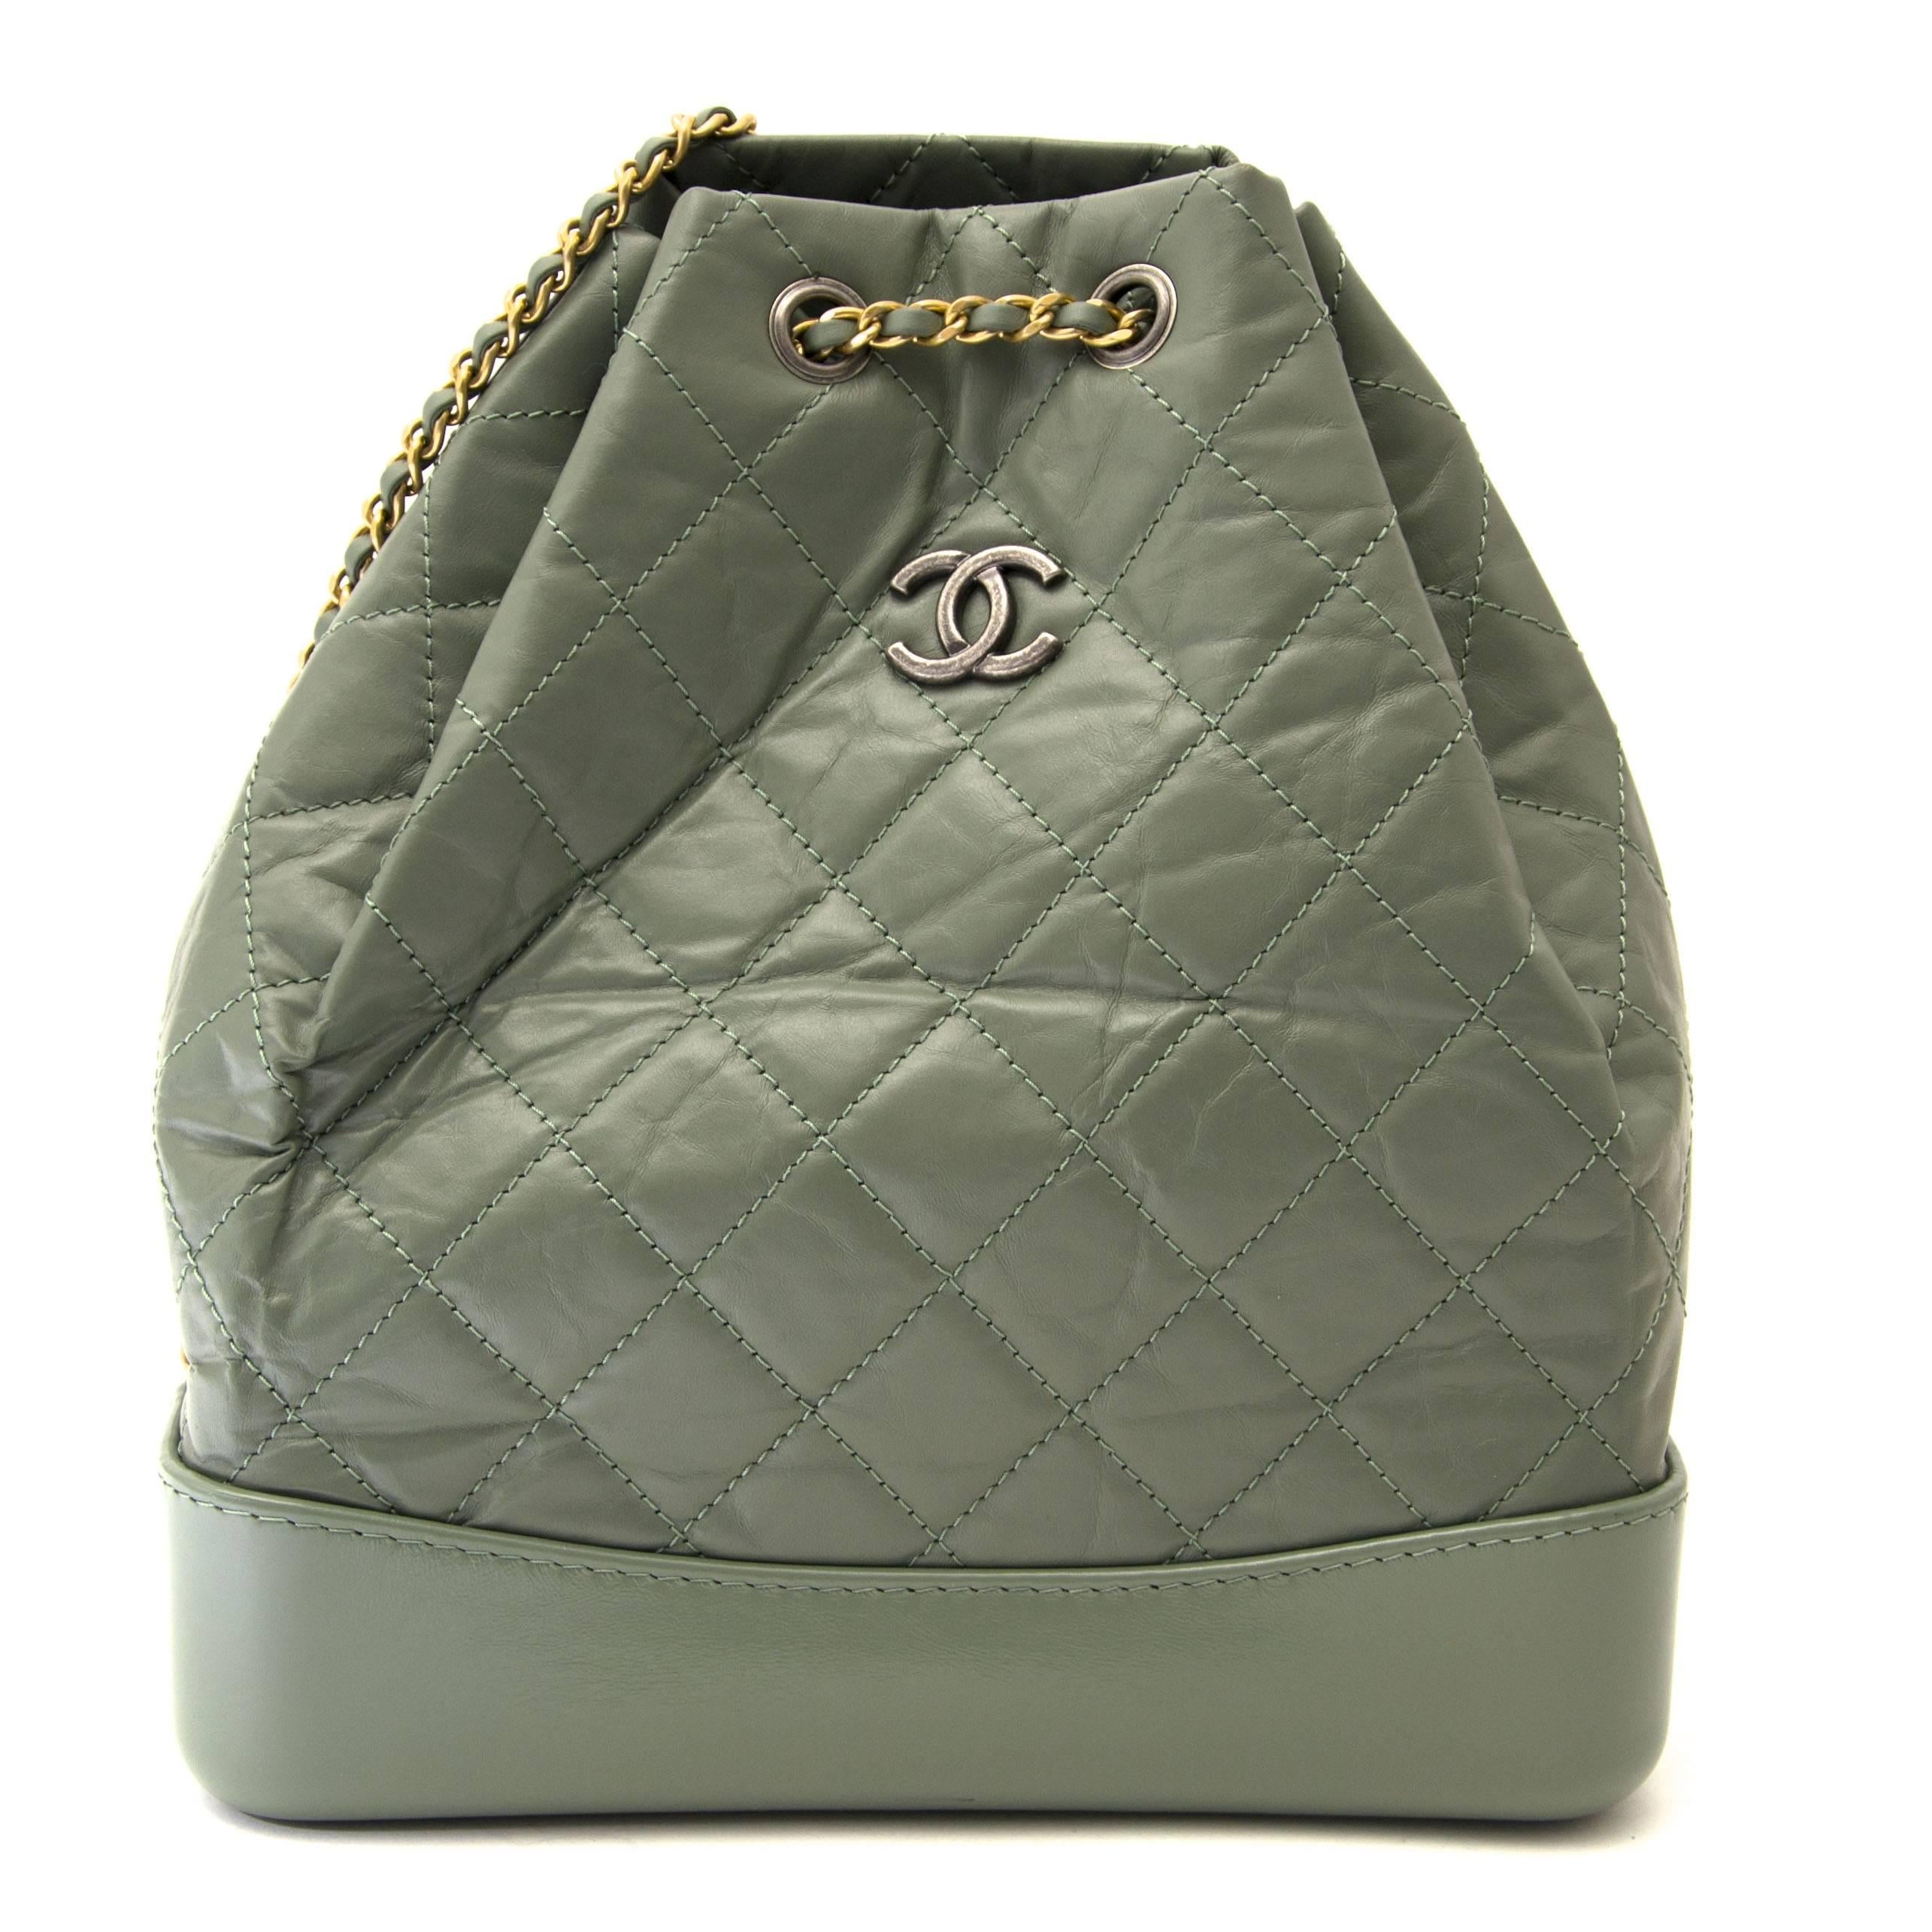 Excellent condition, as new

est retail price €2750,-

Chanel Small Green Gabrielle Backpack

From the Reissue 2.55 to the Boy Chanel, most of Chanel’s iconic handbags are inspired by the founder Coco Chanel.
Named after the founder of the brand,